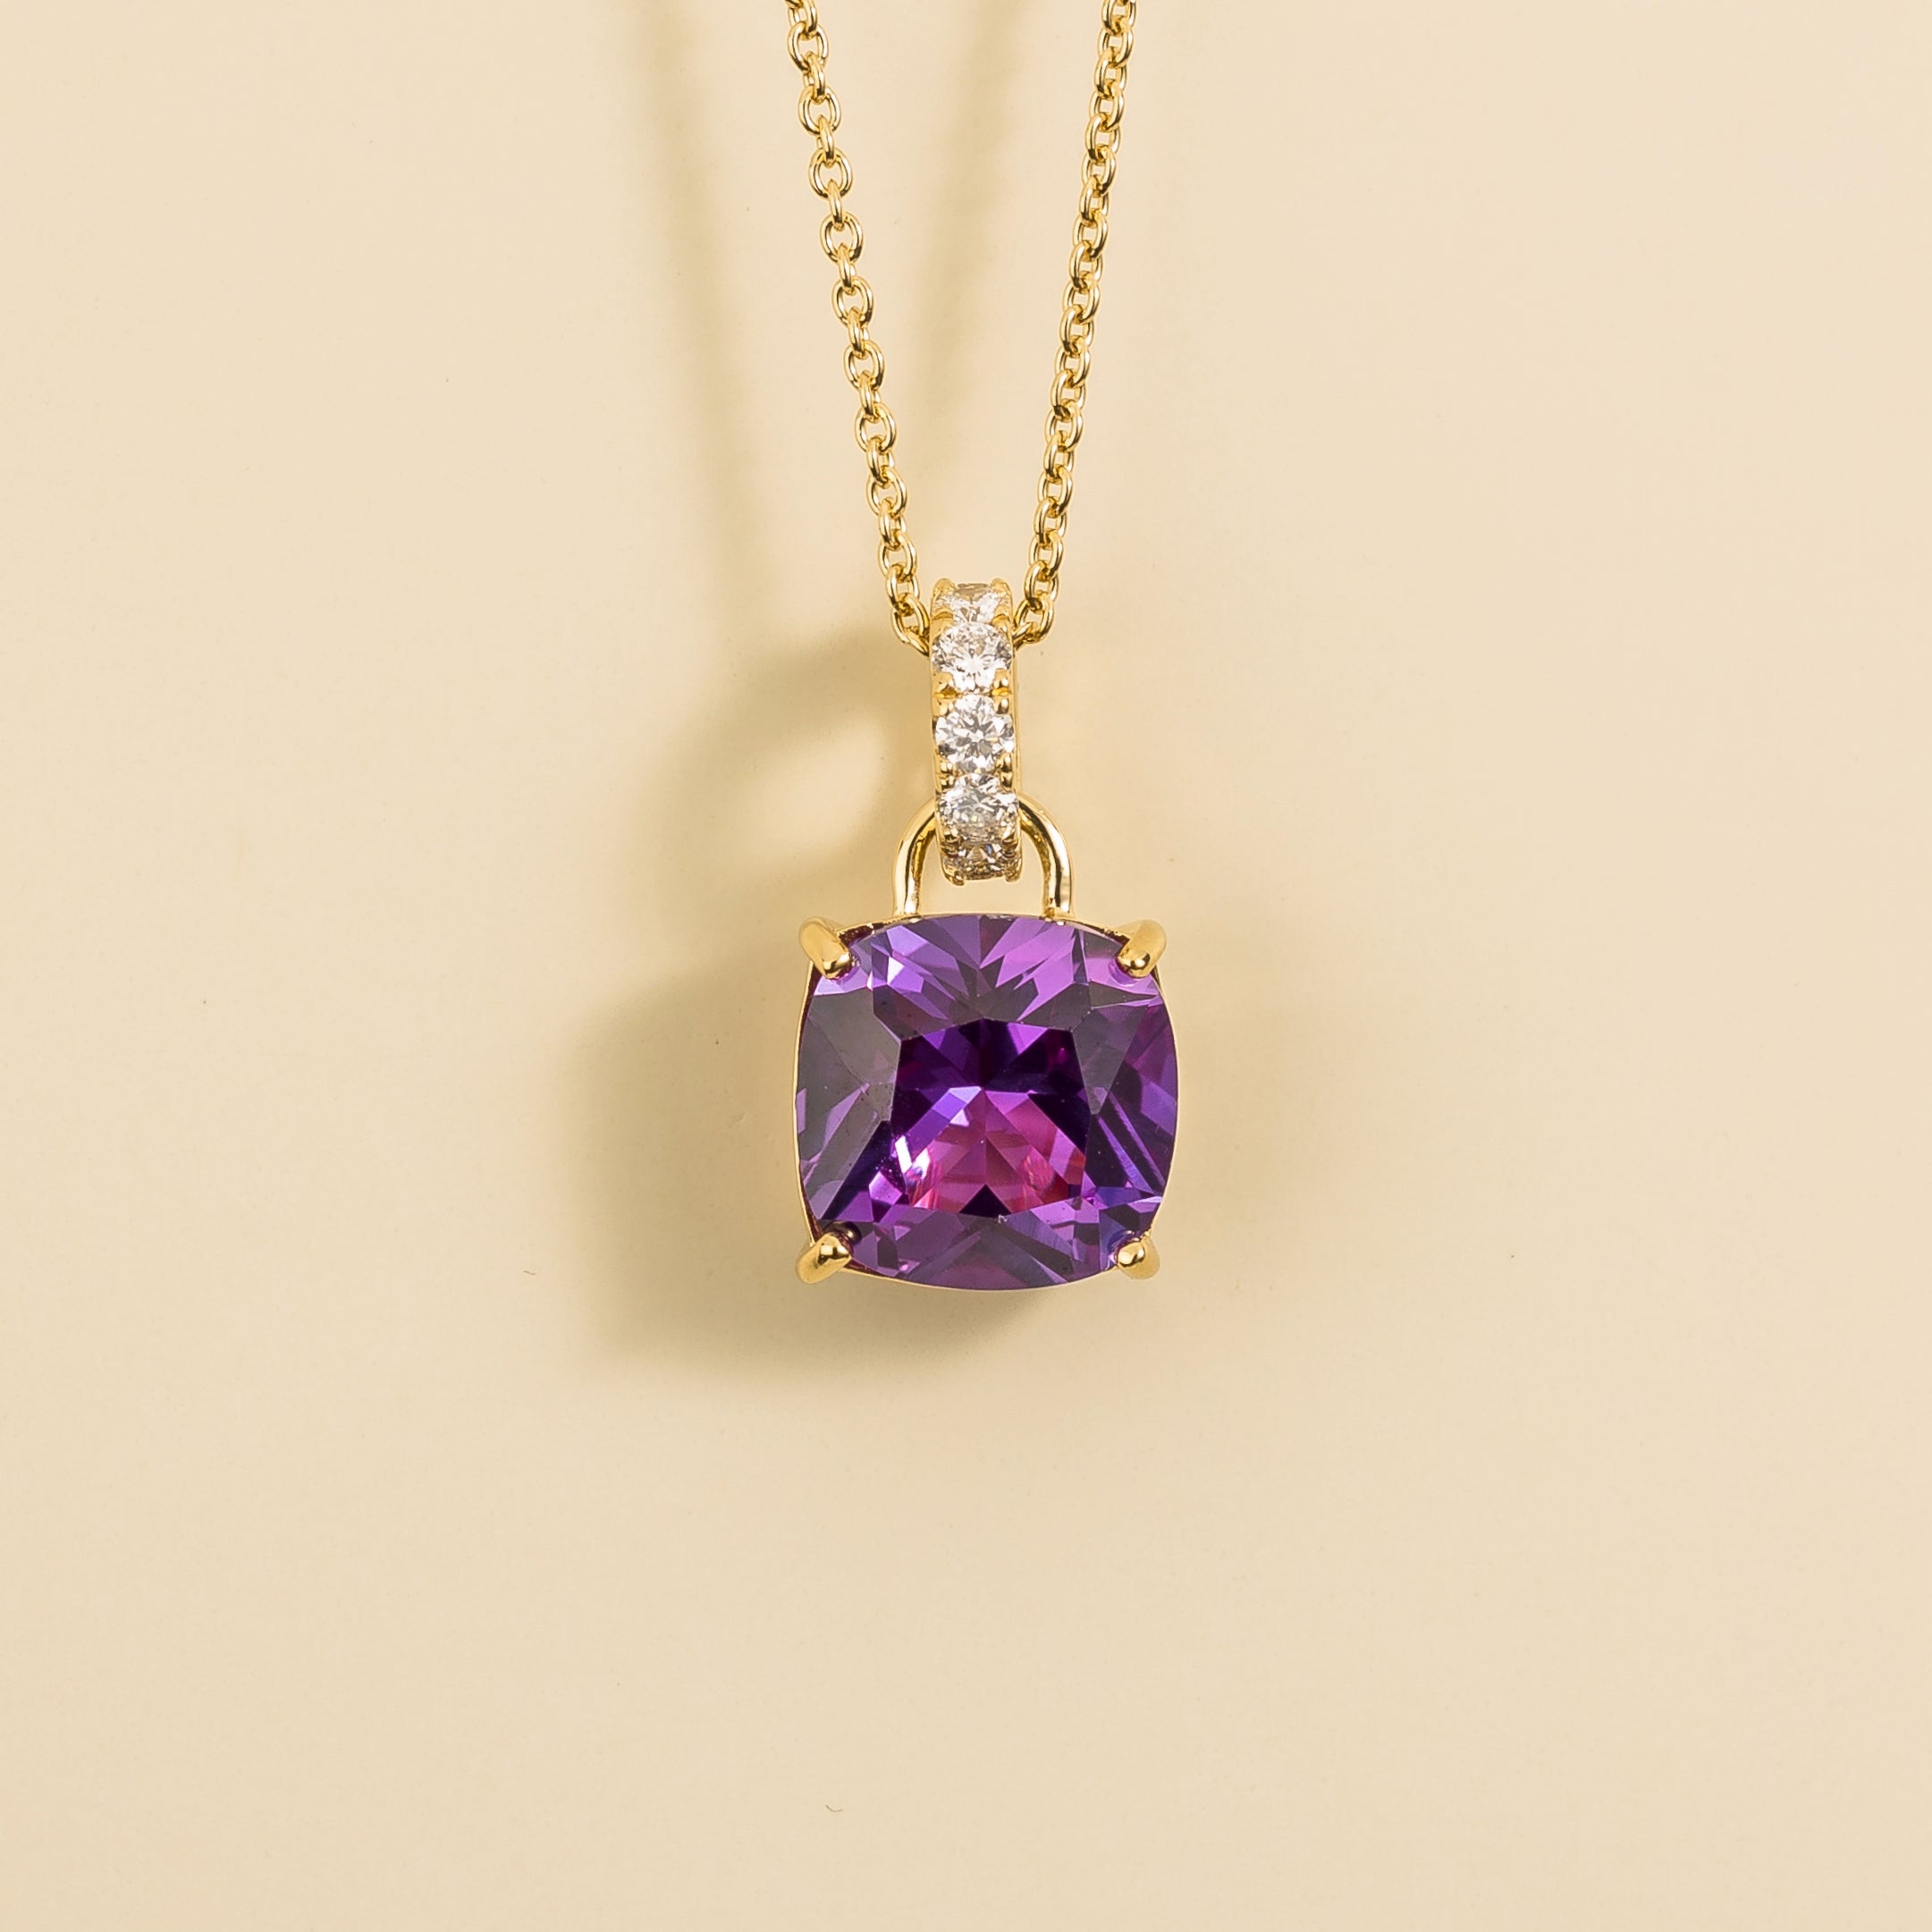 Oreol pendant necklace in Purple sapphire and Diamond set in Gold By Bespoke Jewellery London